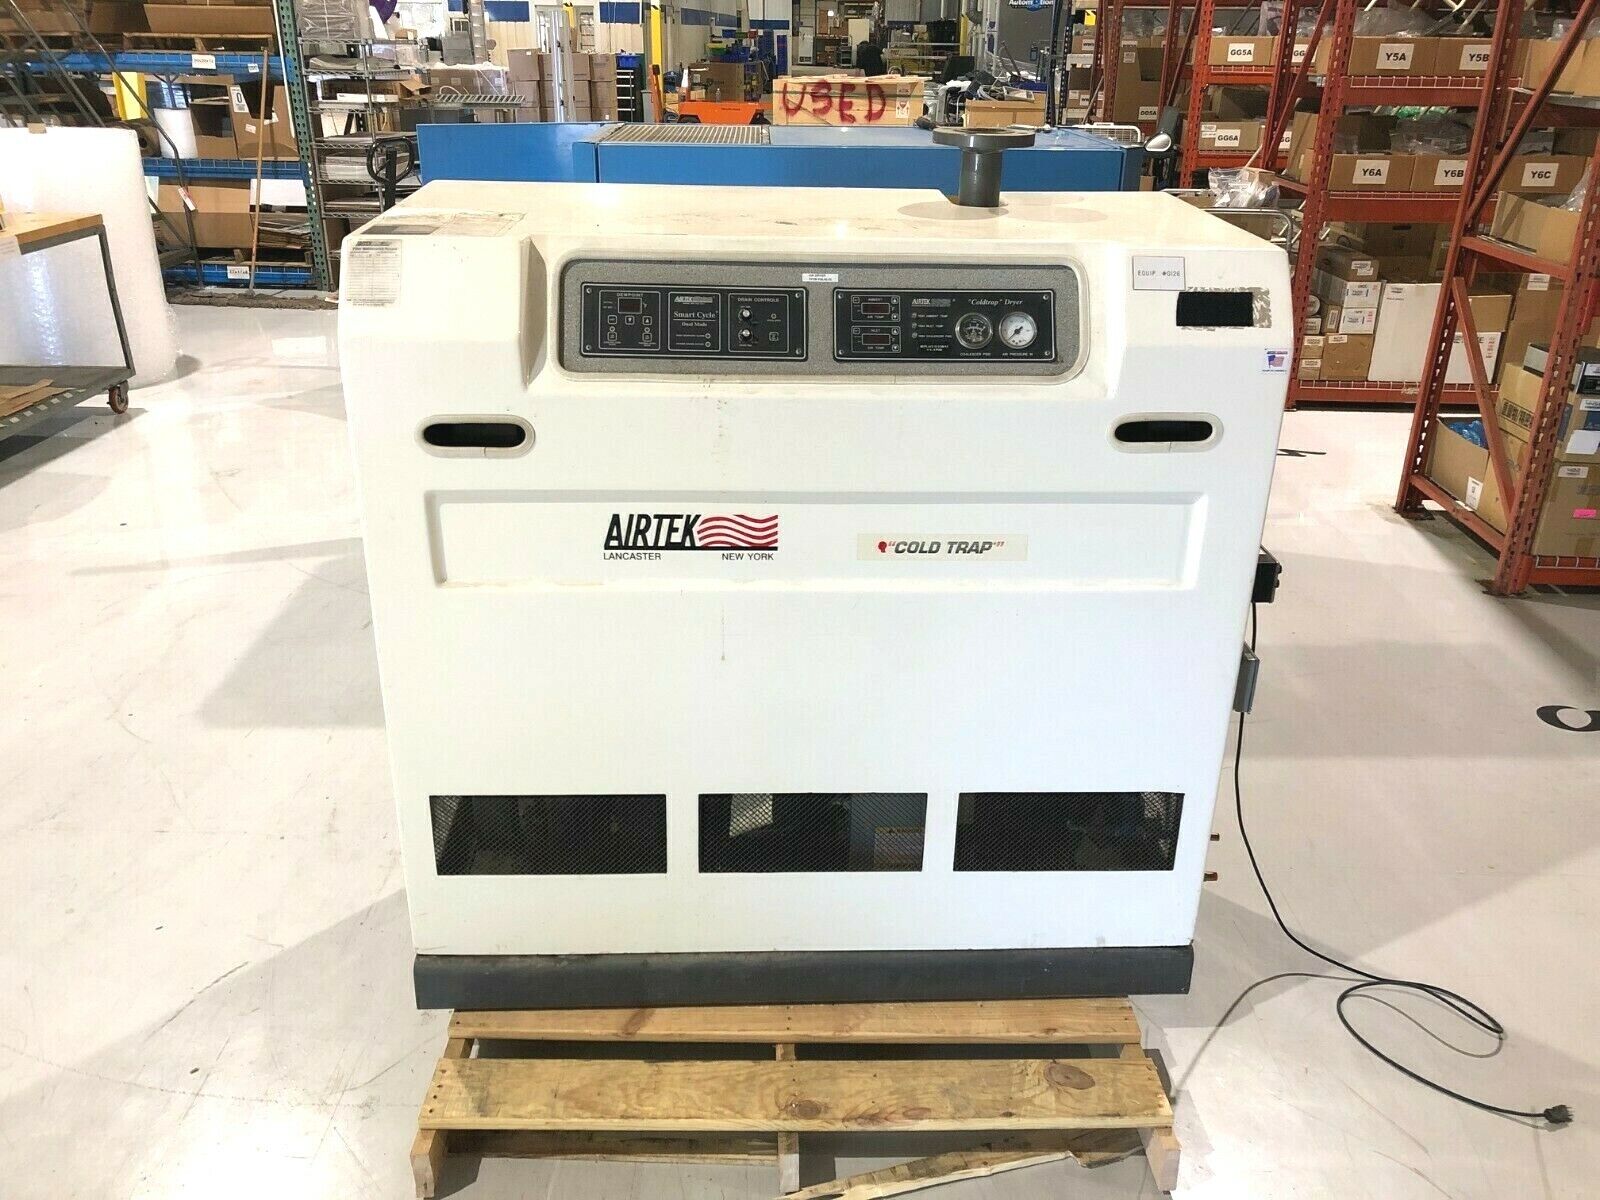 Airtek CT 400 Refrigerated Air Dryer, Compressor Drying System